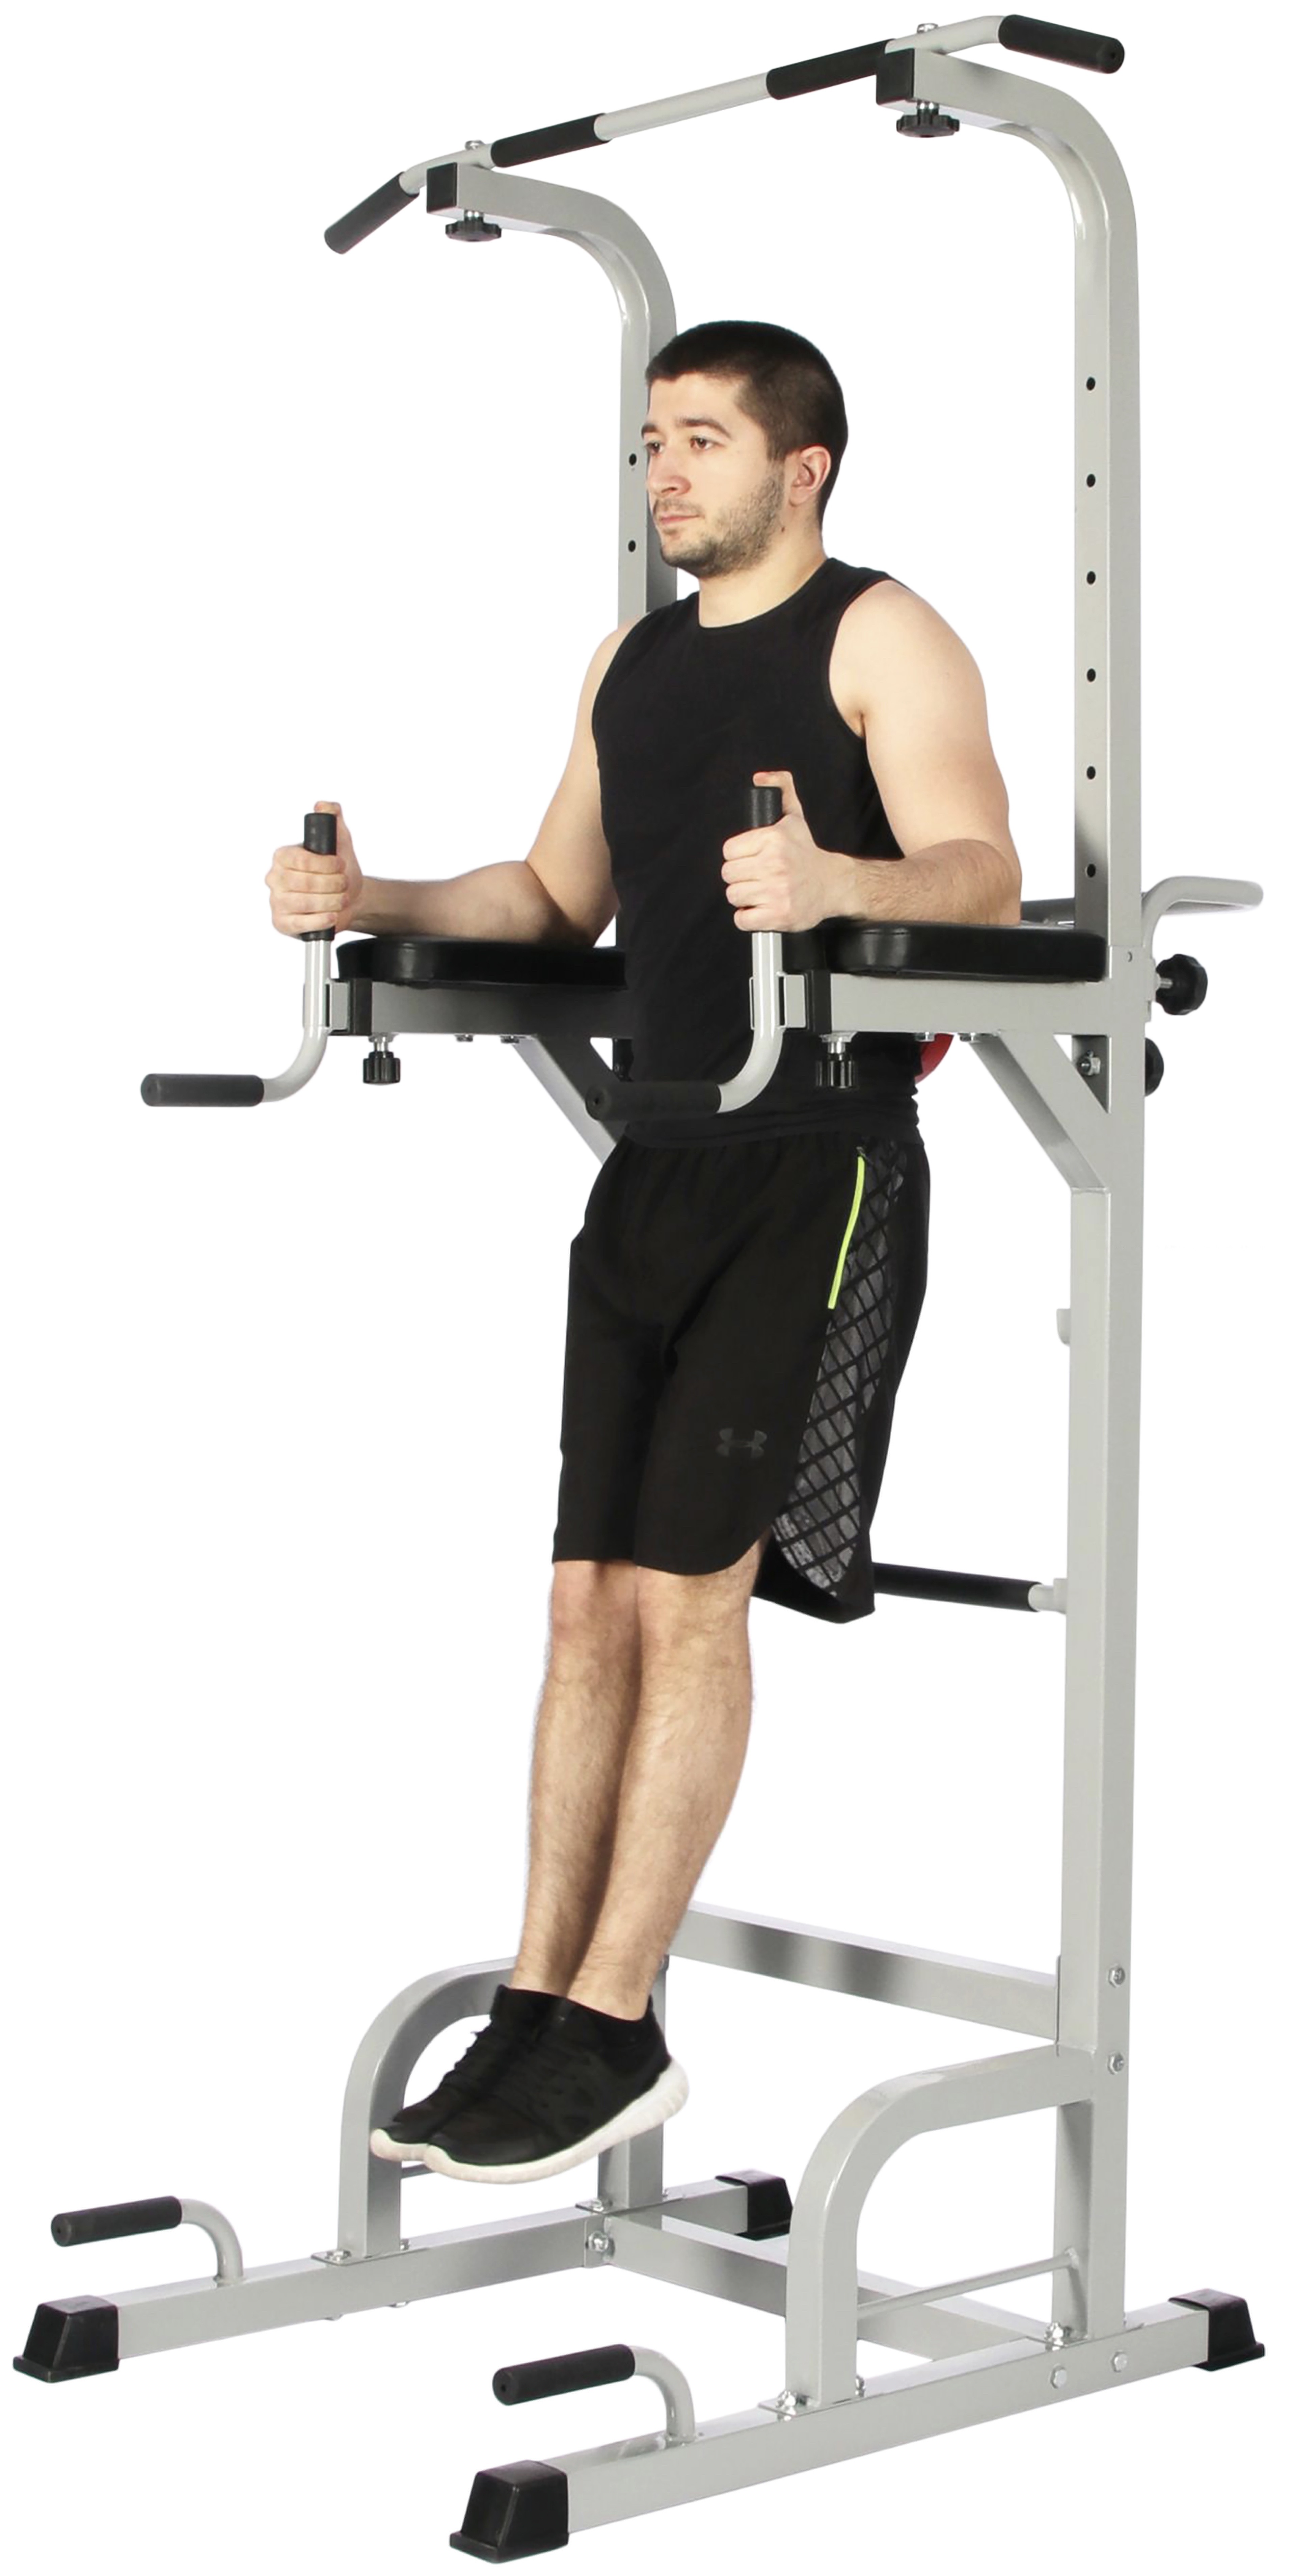 Everyday Essentials Power Tower with Push-up, Pull-up and Workout Dip Station for Home Gym Strength Training - image 4 of 6